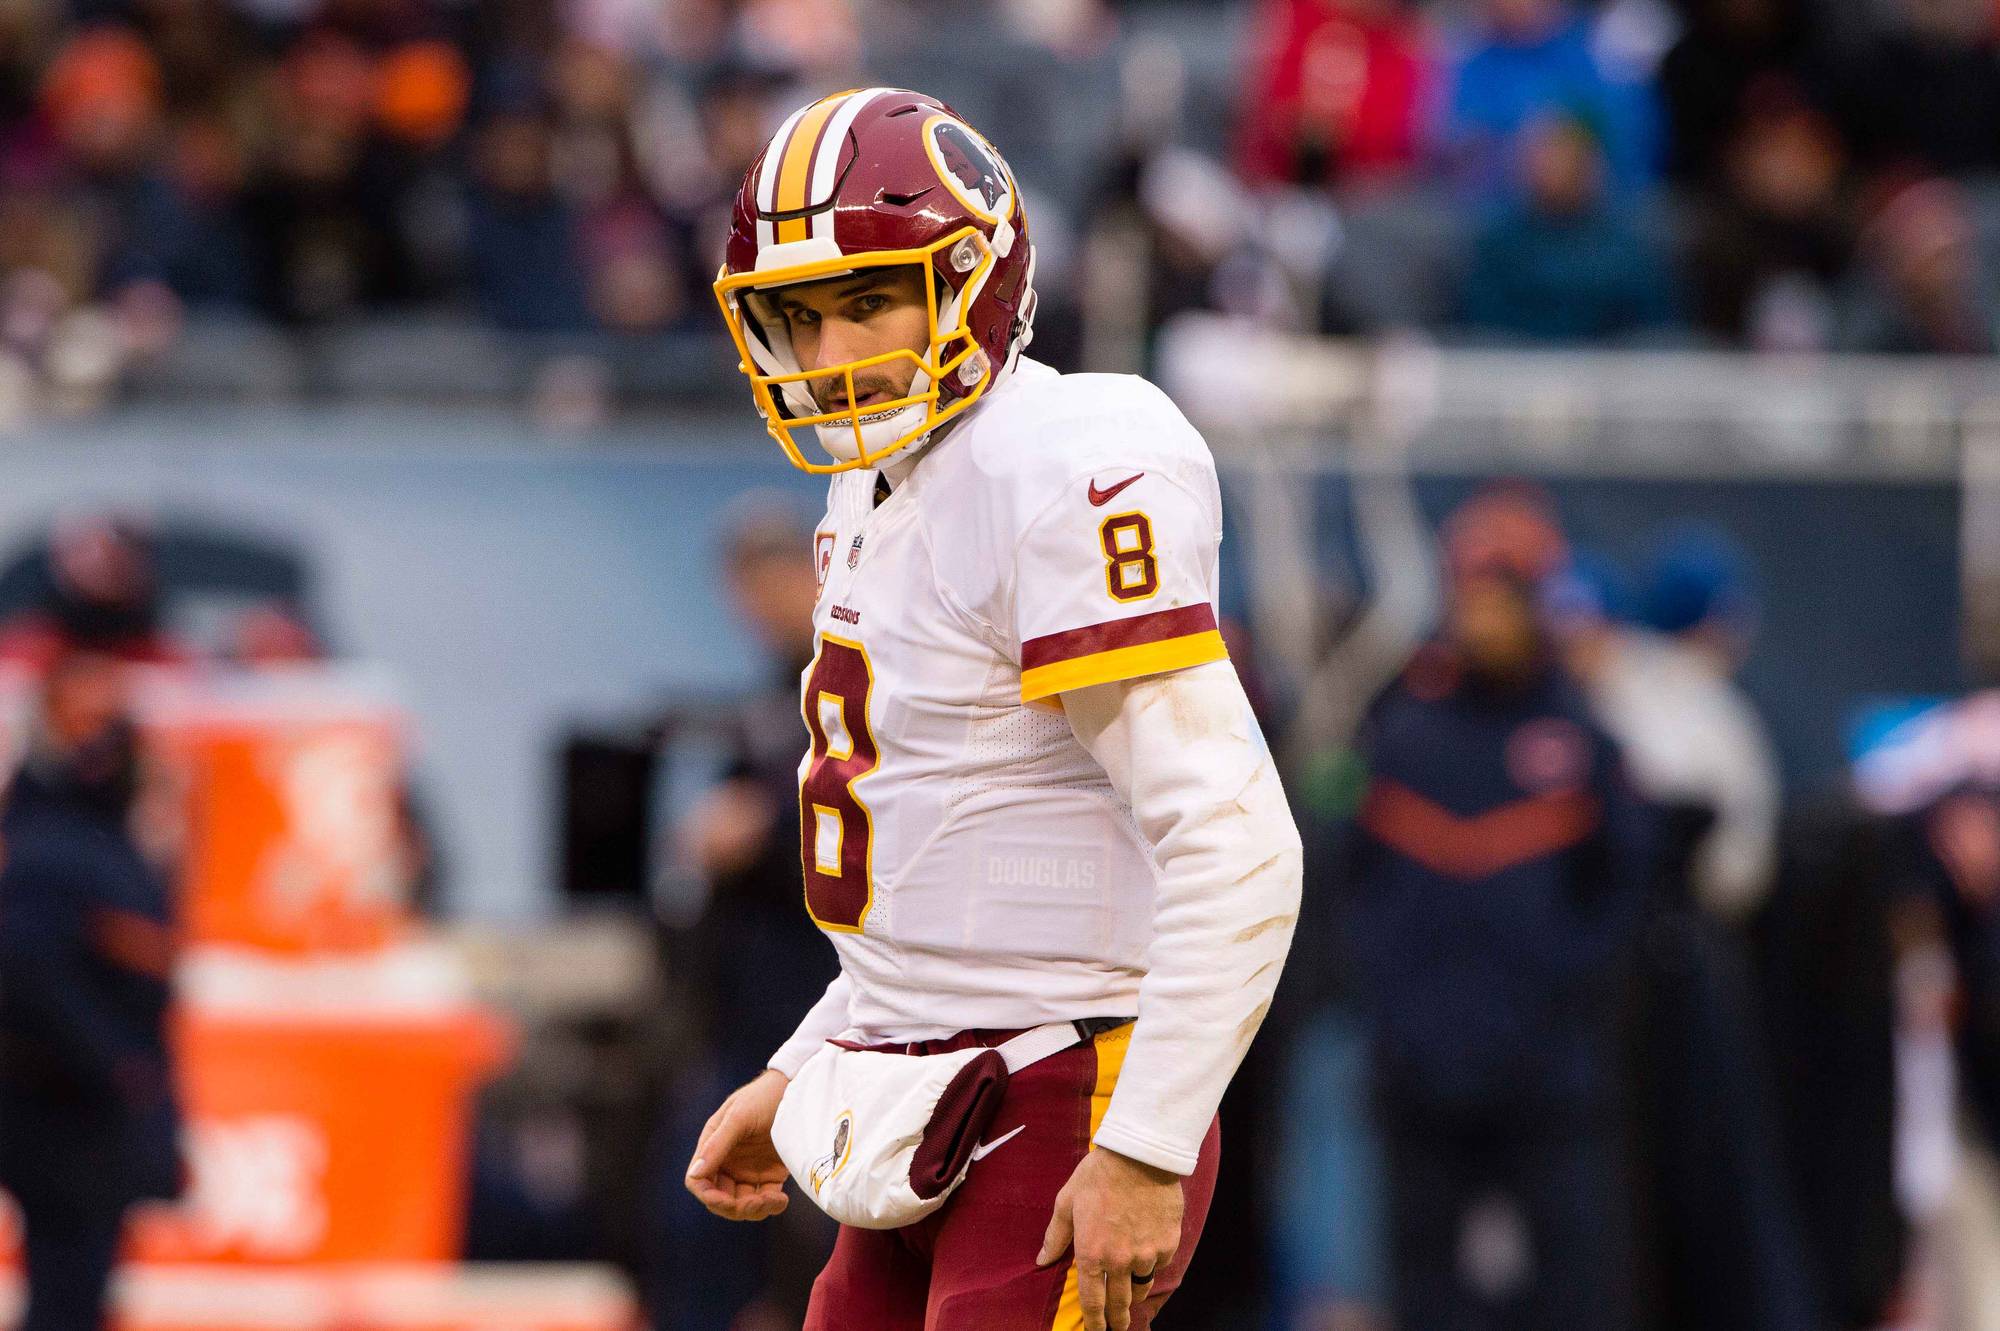 Redskins Place Exclusive Franchise Tag on QB Kirk Cousins